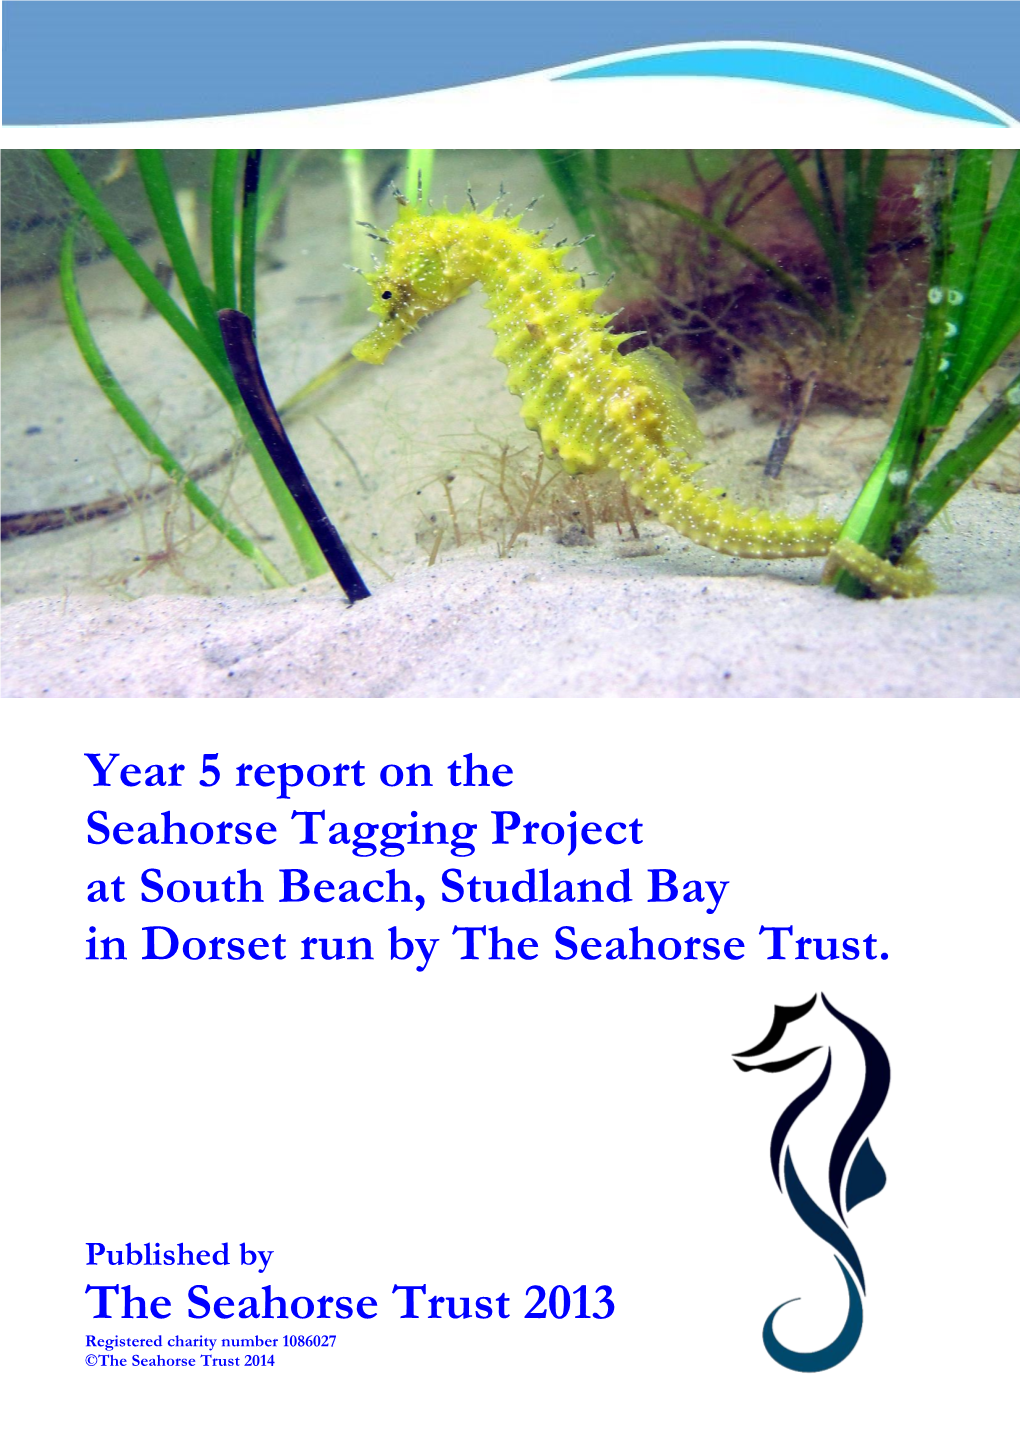 Year 5 Report on the Tagging of Seahorses at Studland Bay I Dorset